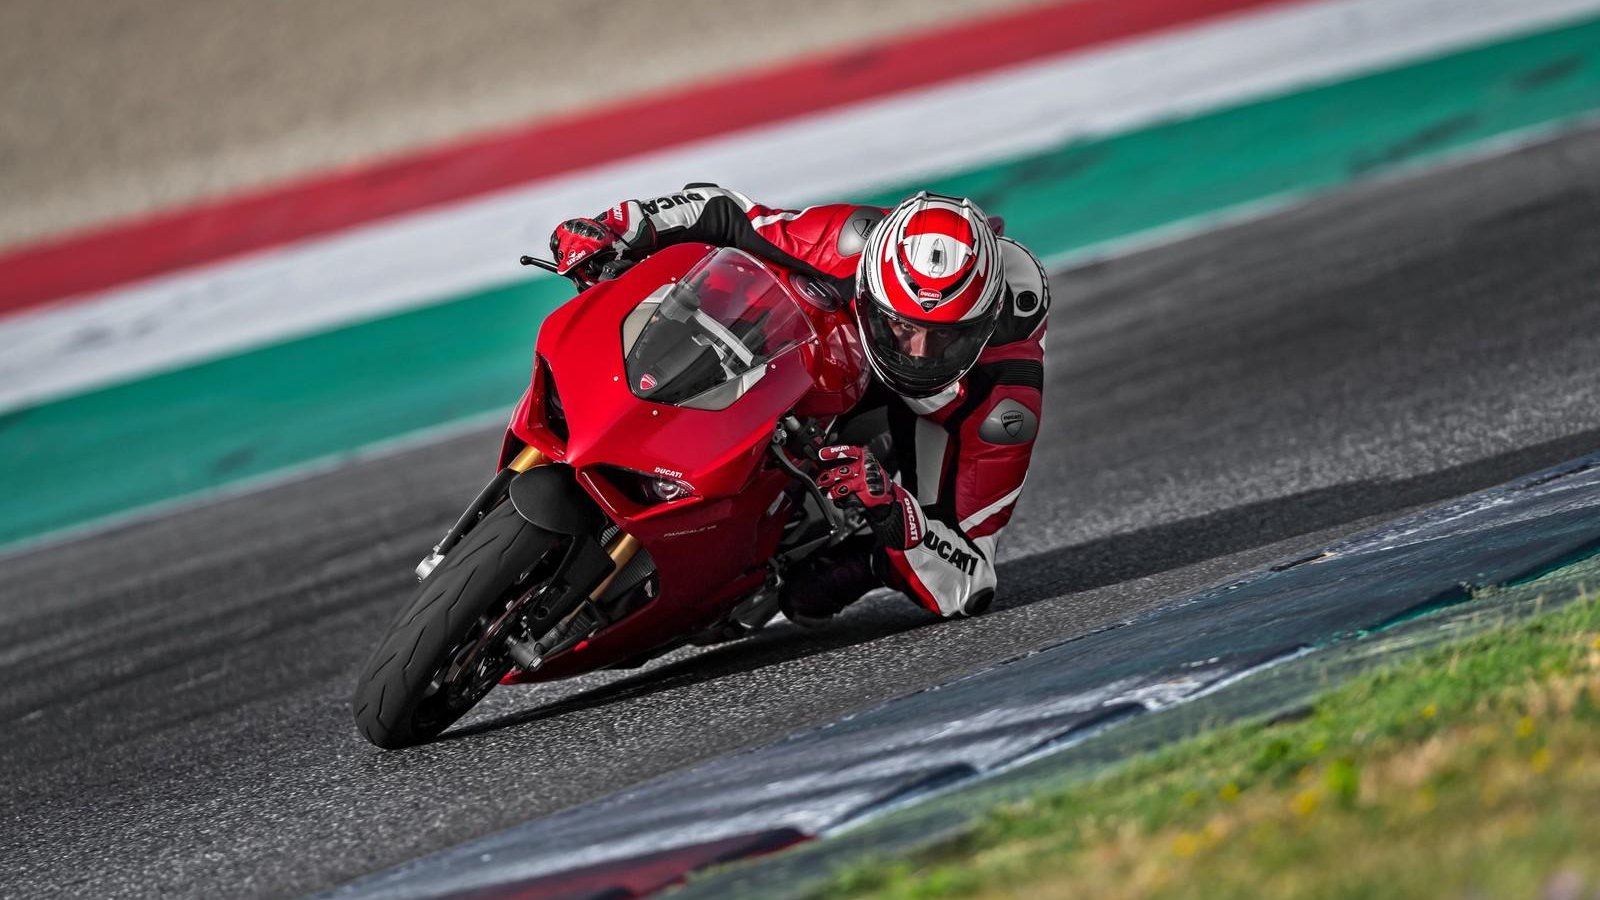 2019 Ducati Panigale V4 Pictures, Photos, Wallpapers - Ducati Panigale V4s , HD Wallpaper & Backgrounds